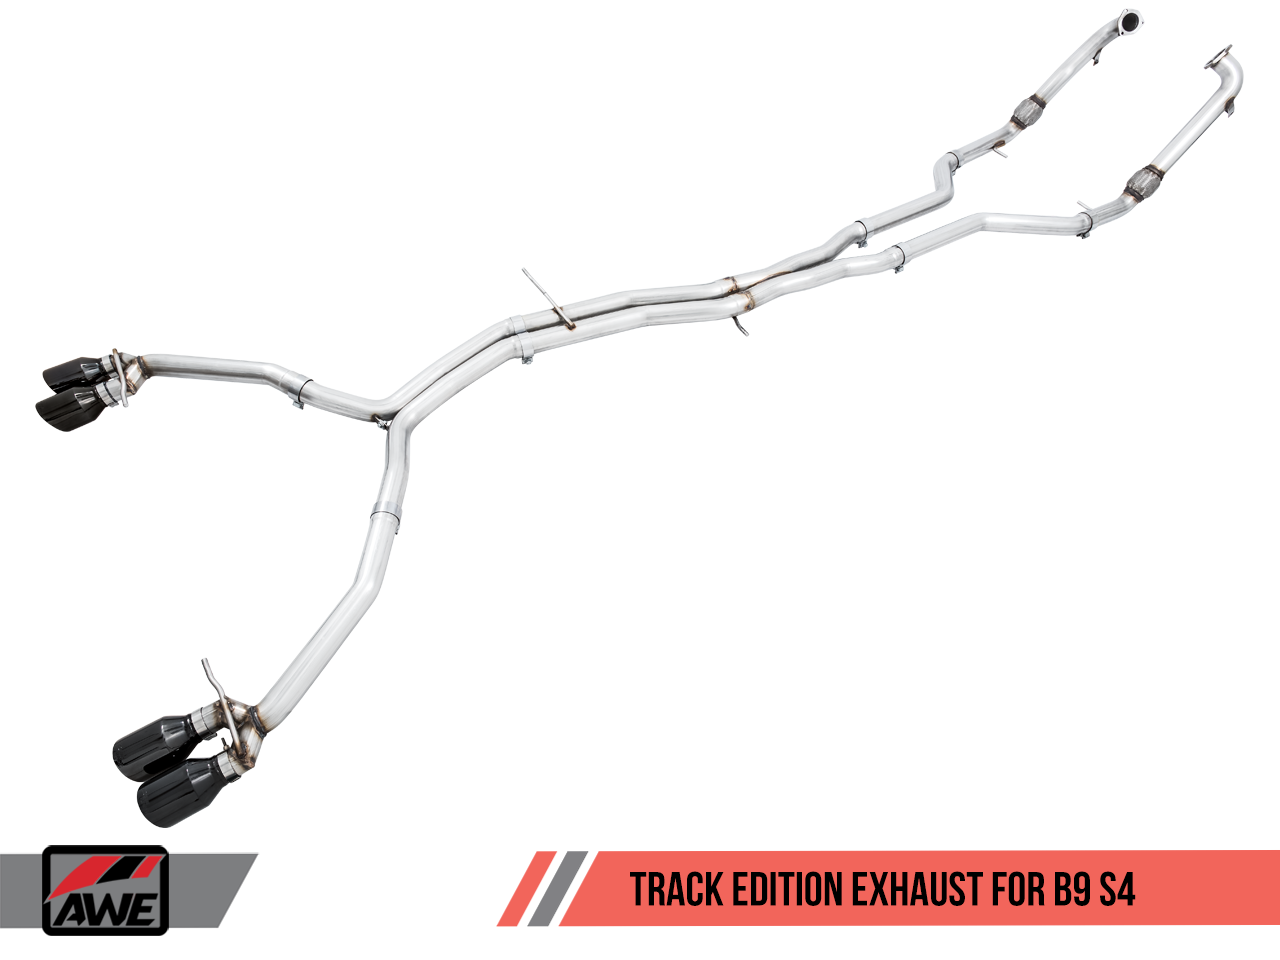 AWE Track Edition Exhaust for B9 S4 - Resonated for Performance Catalyst - Motorsports LA